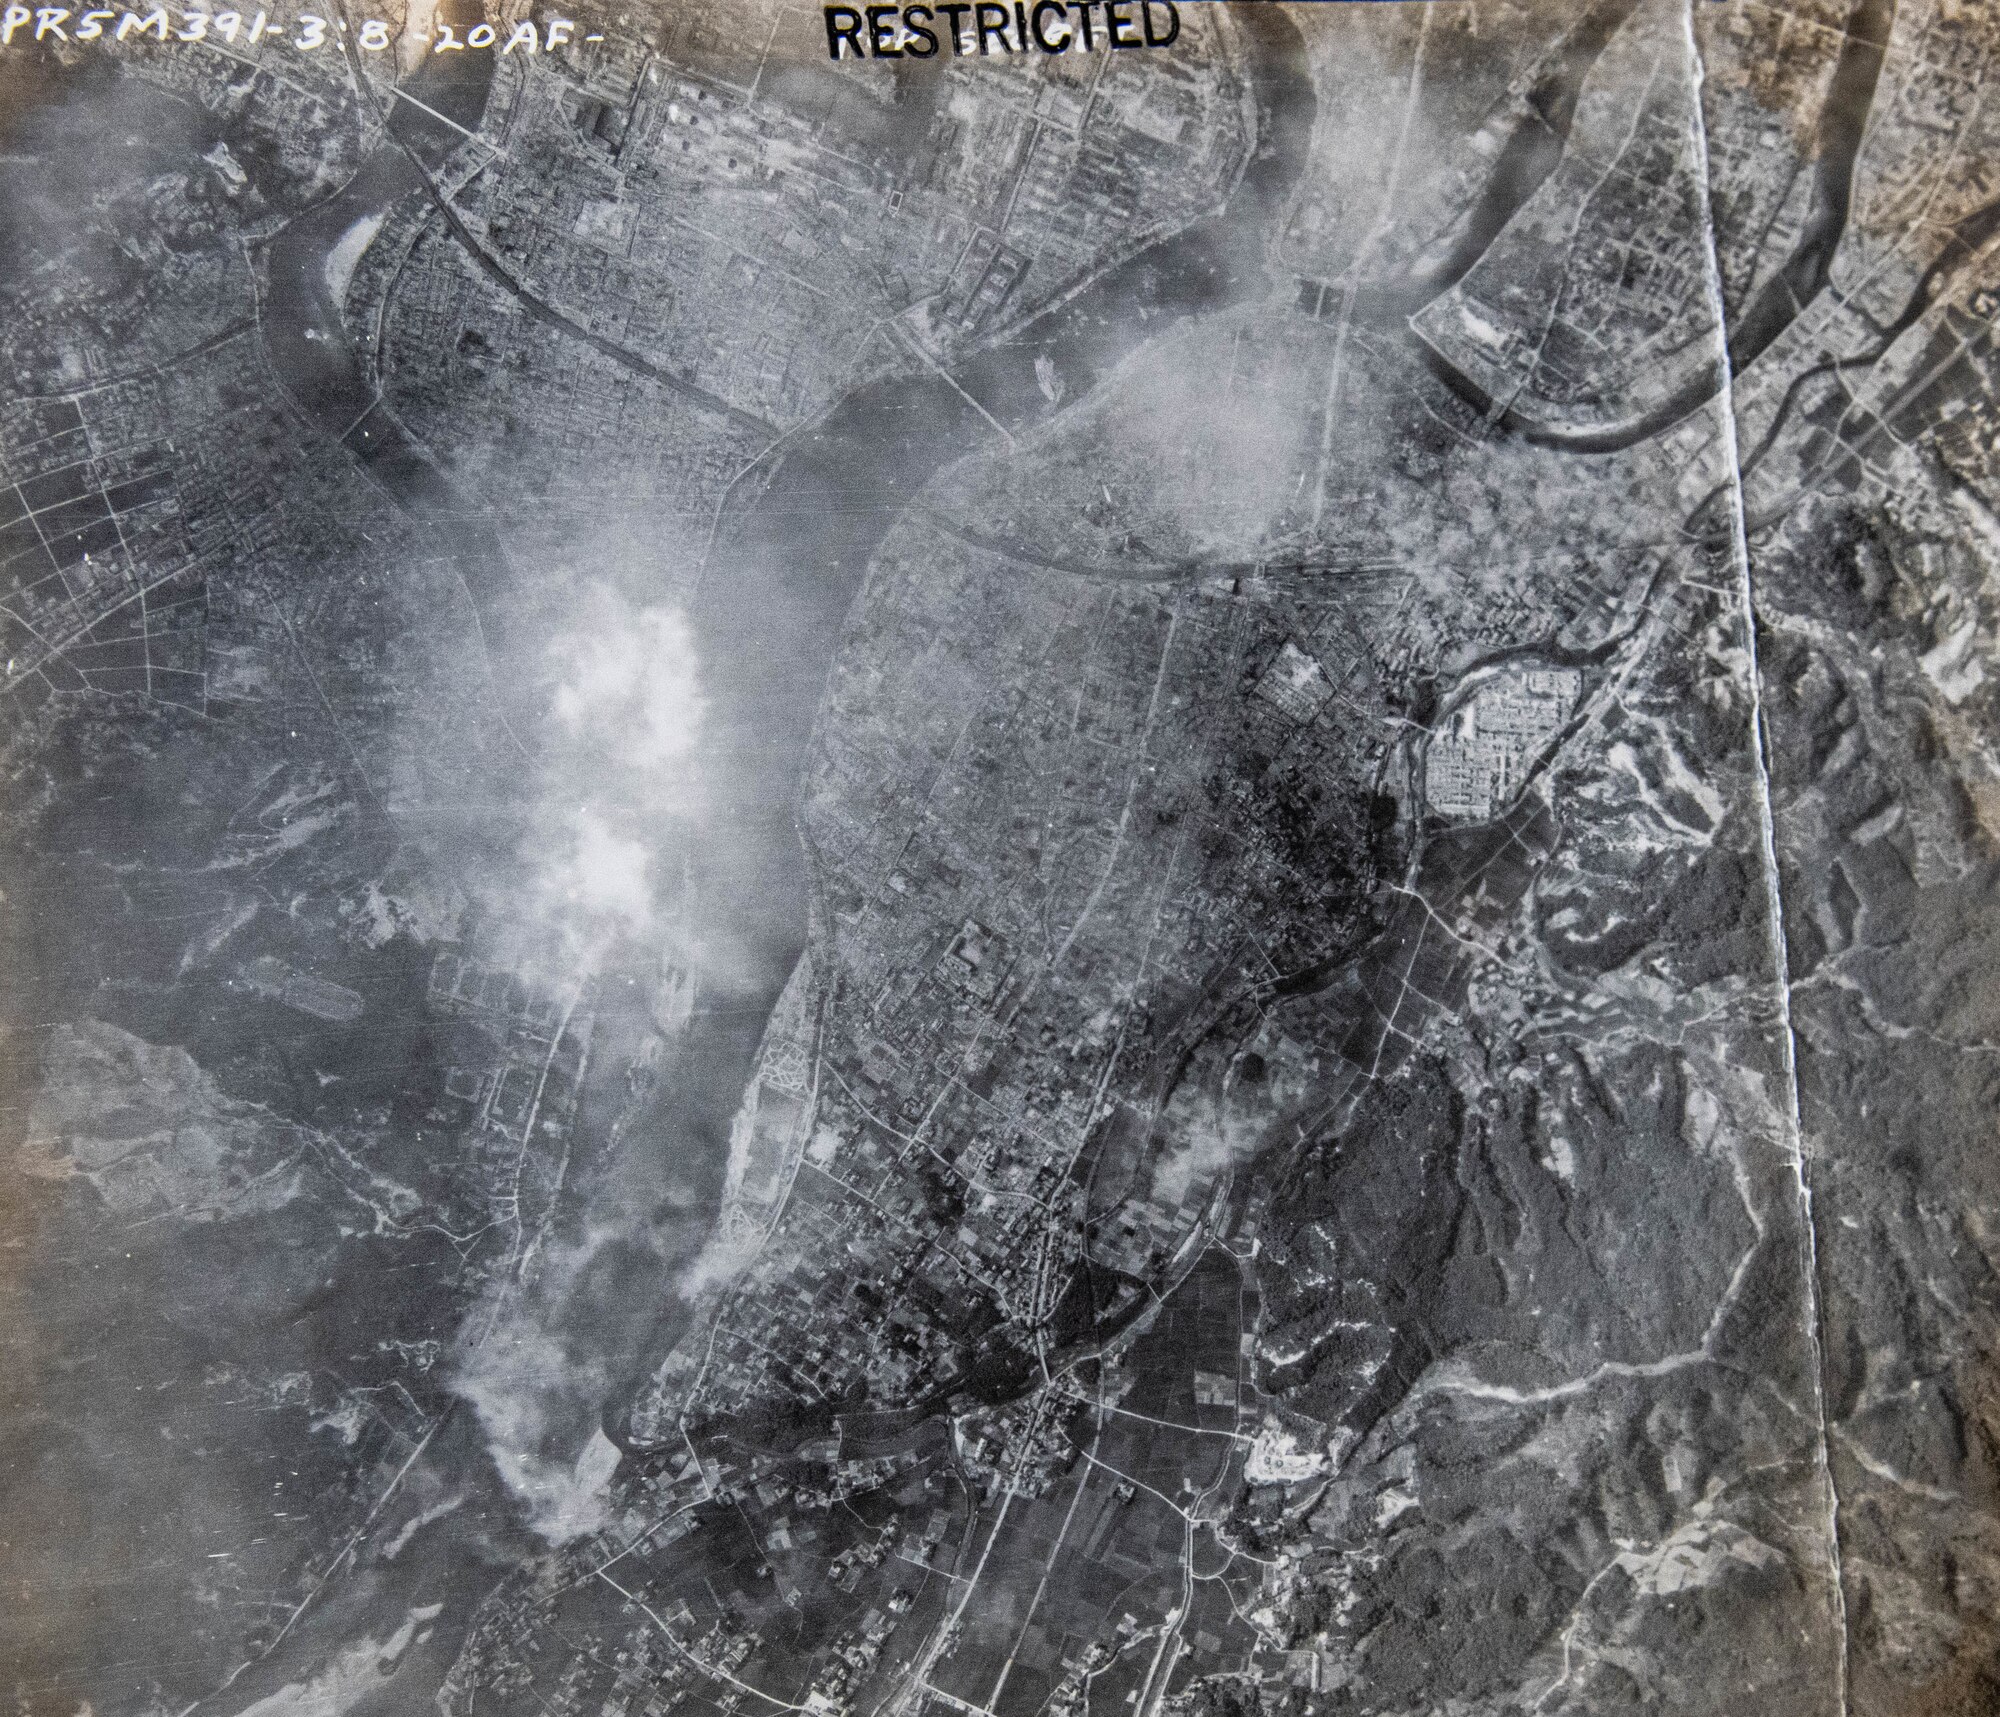 An aerial photo of Hiroshima showing the destruction caused the atomic bomb on Aug. 6, 1945.